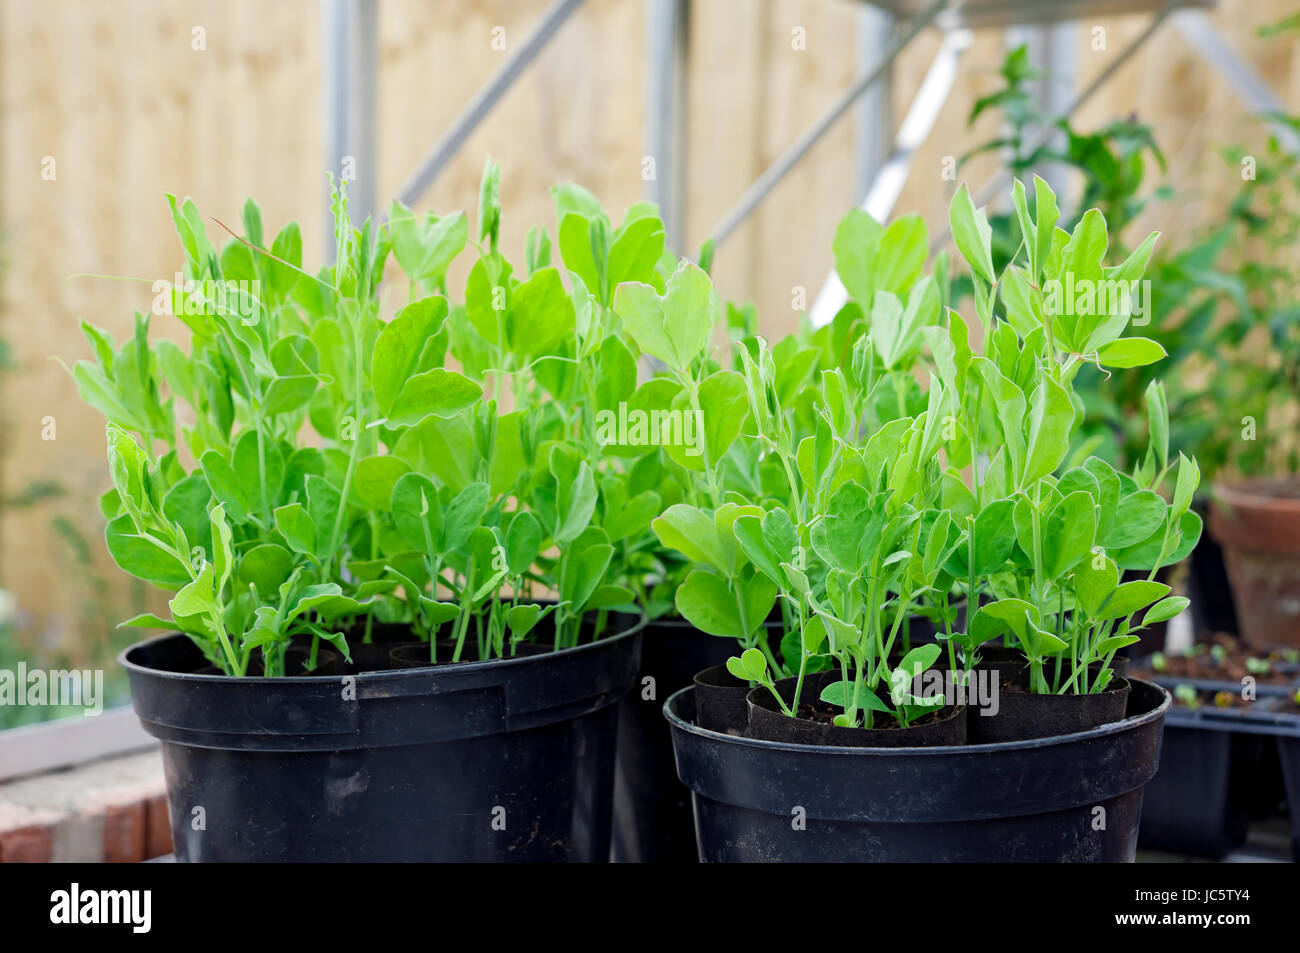 Close up of young sweet pea sweet peas seedling seedlings plants in plastic pots in the greenhouse England UK United Kingdom GB Great Britain Stock Photo